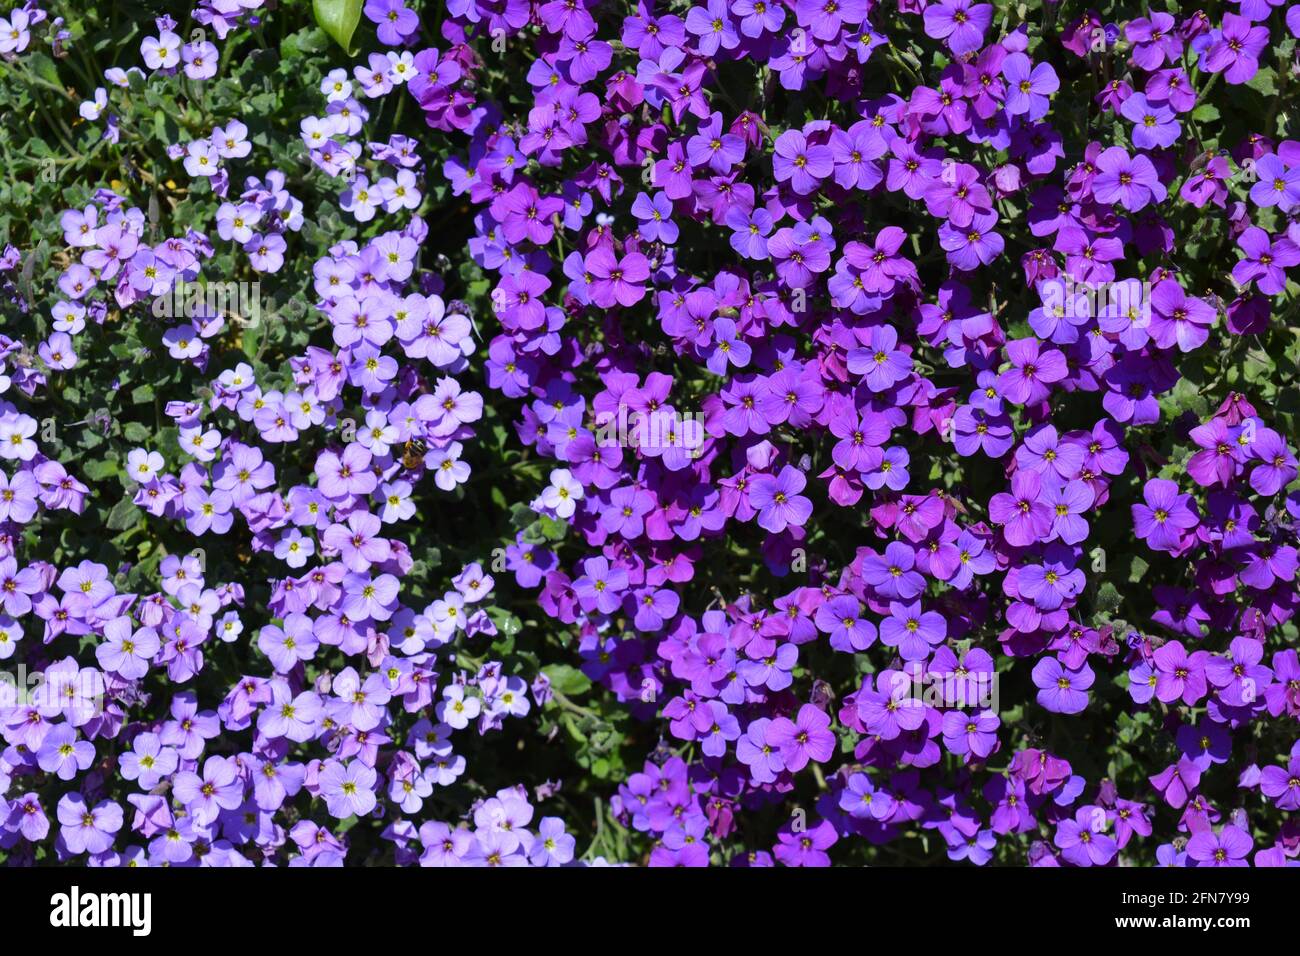 Purple Aubretia flowers, also known as Rock Cress, cascading down a garden wall Stock Photo